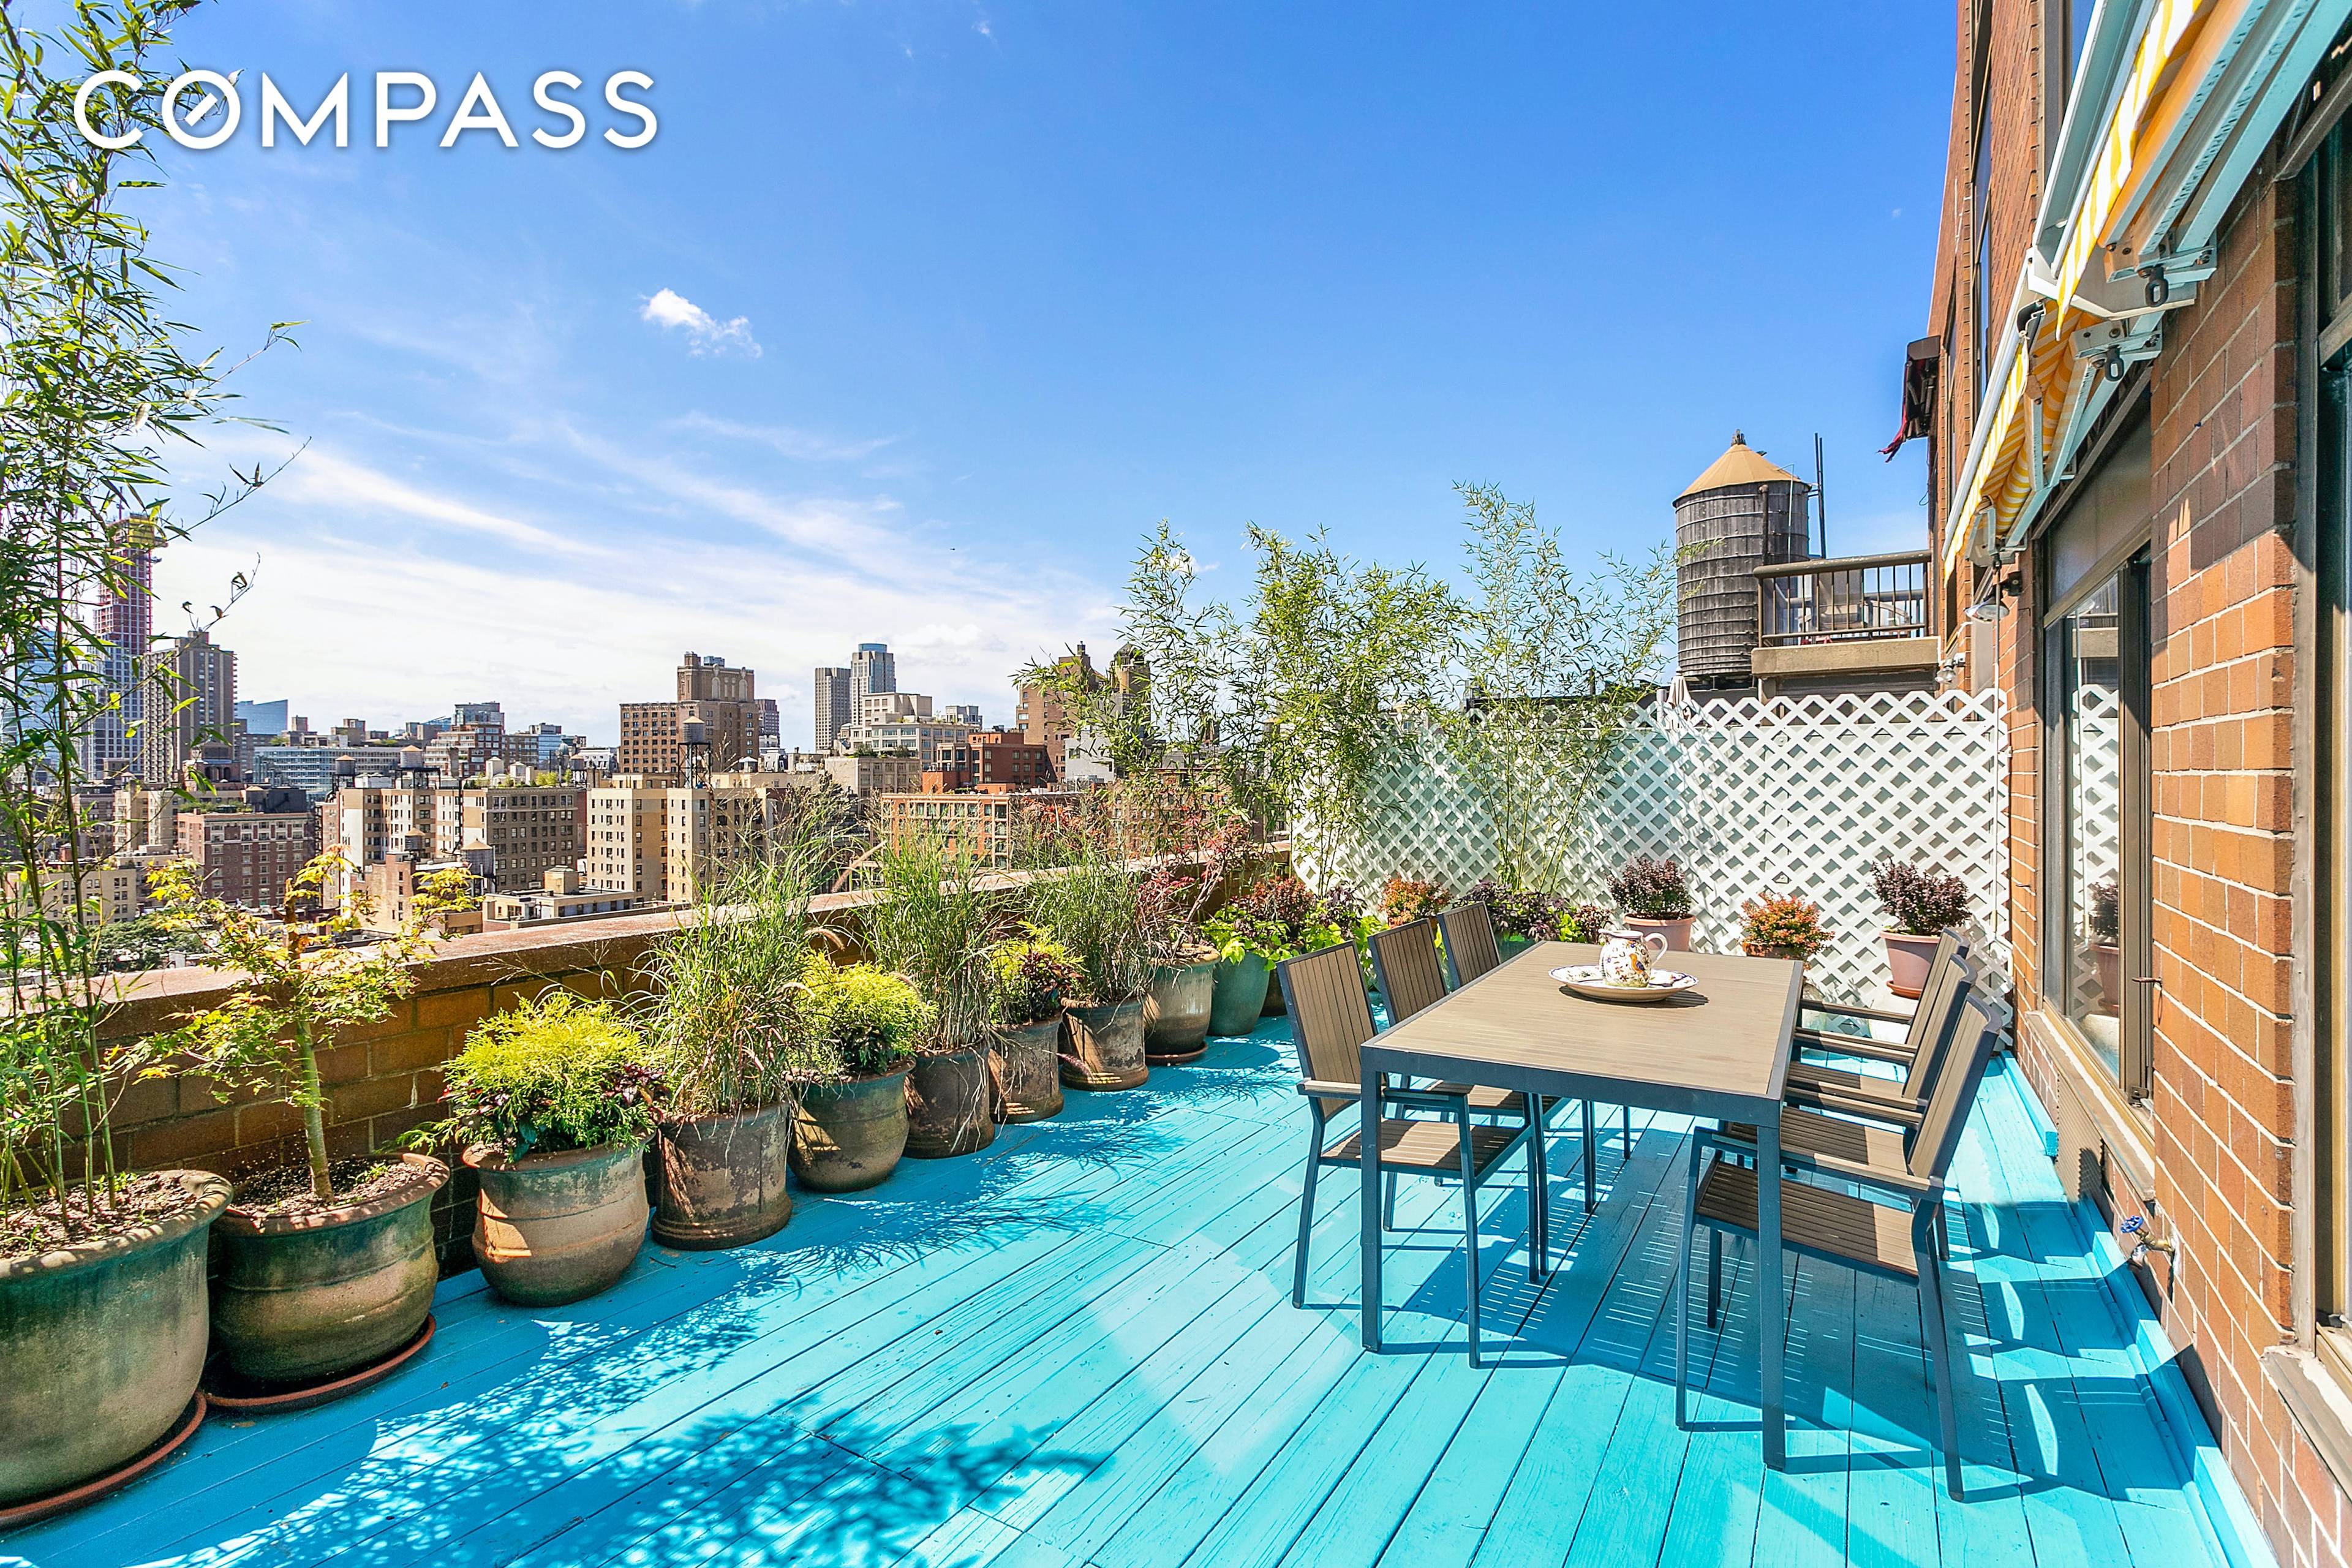 FURNISHED FIND w TERRIFIC TERRACE 1 YEAR MINIMUM FURNISHED RENTAL SHARES WELCOME NO PETS PERMITTED 2 PRIVATE TERRACES 3 BEDROOMS 4 EVER CITY VIEWS MESSAGE FROM OWNER I m living ...